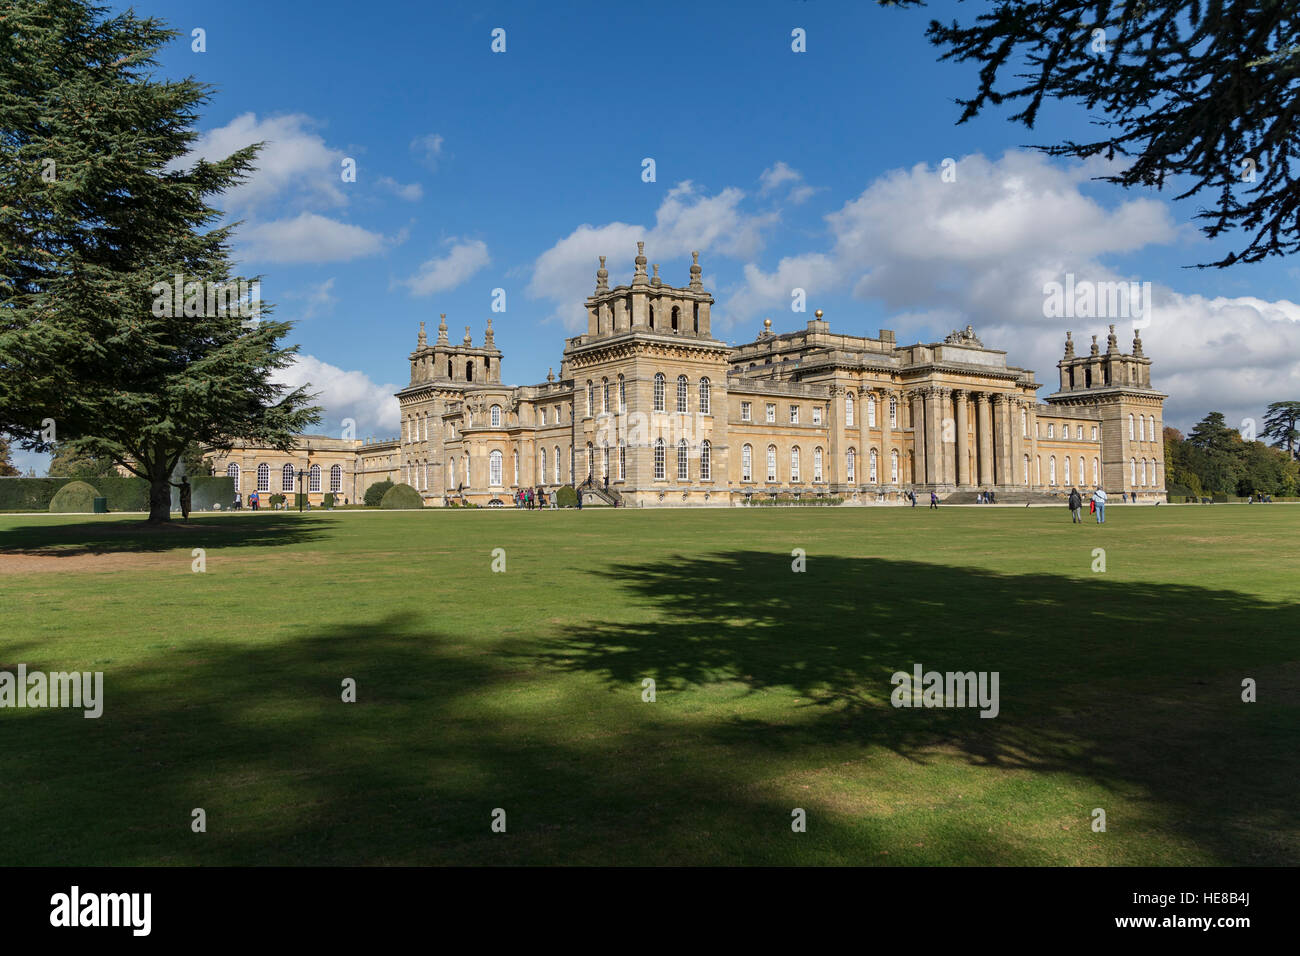 Blenheim Palace is a monumental country house situated in Woodstock, Oxfordshire, England. Stock Photo